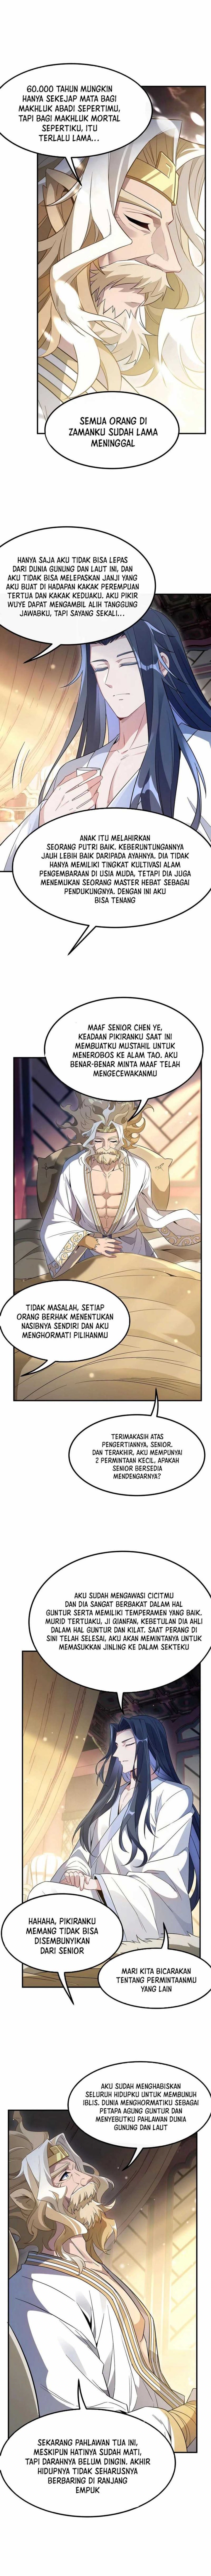 Dilarang COPAS - situs resmi www.mangacanblog.com - Komik my female apprentices are all big shots from the future 237 - chapter 237 238 Indonesia my female apprentices are all big shots from the future 237 - chapter 237 Terbaru 6|Baca Manga Komik Indonesia|Mangacan